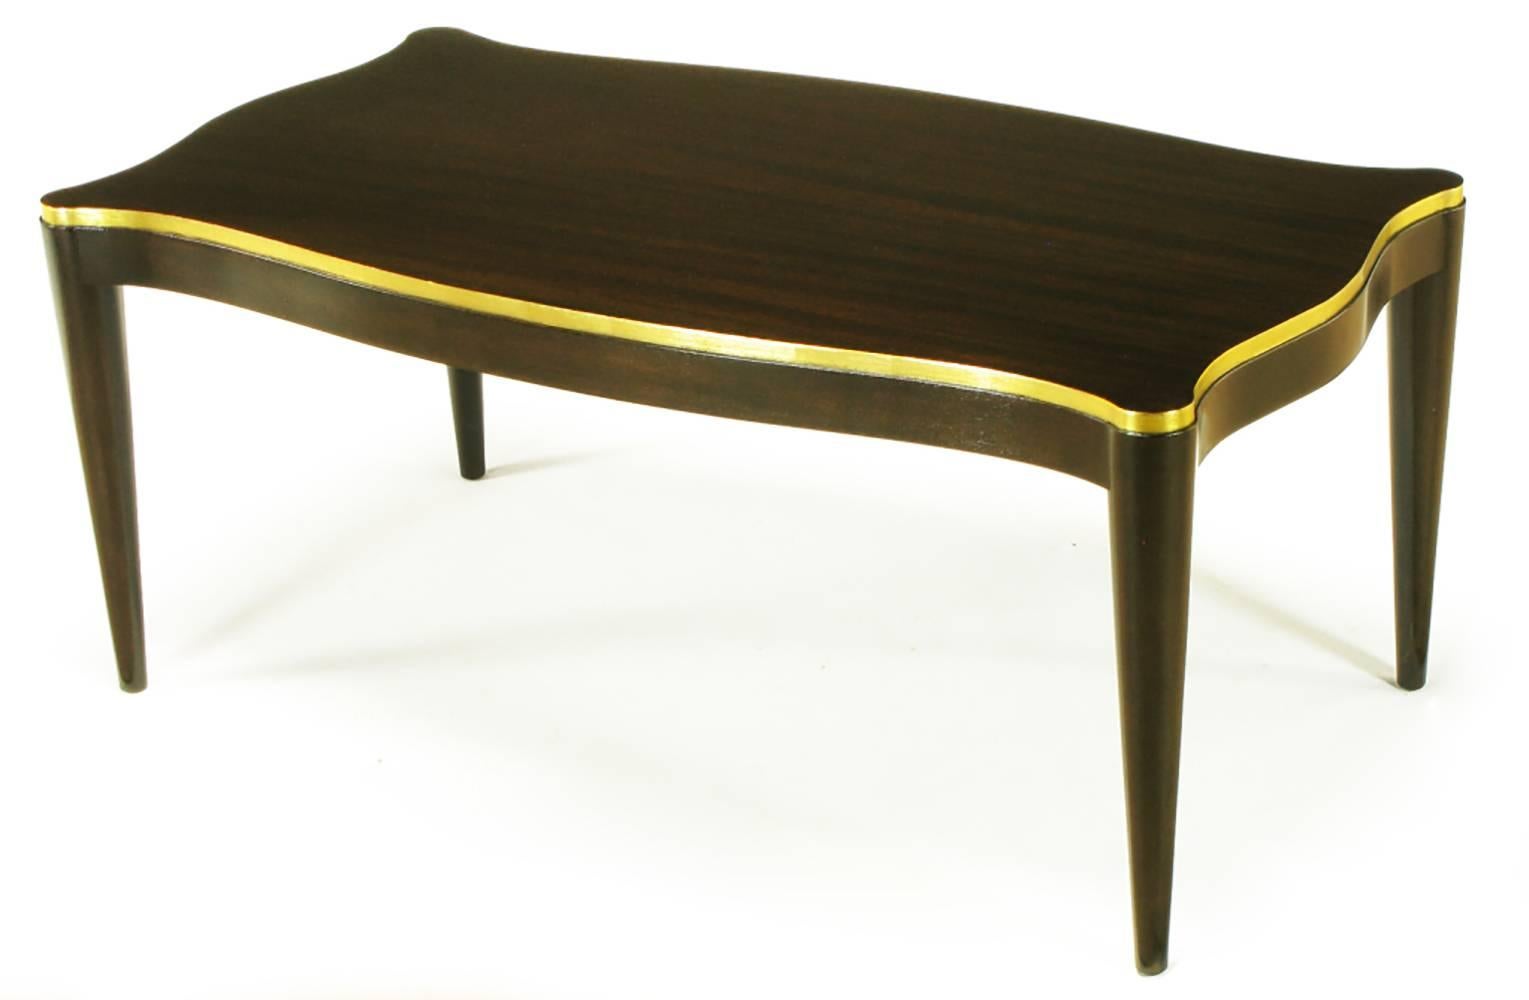 Davidson Ltd, elegant ribbon mahogany and parcel gilt sinuous coffee table, Extreme taper to the conical legs form following apron with gilt banding. Davidson Ltd. was a custom Chicago fine furniture maker that sold exclusively to the trade. Partial